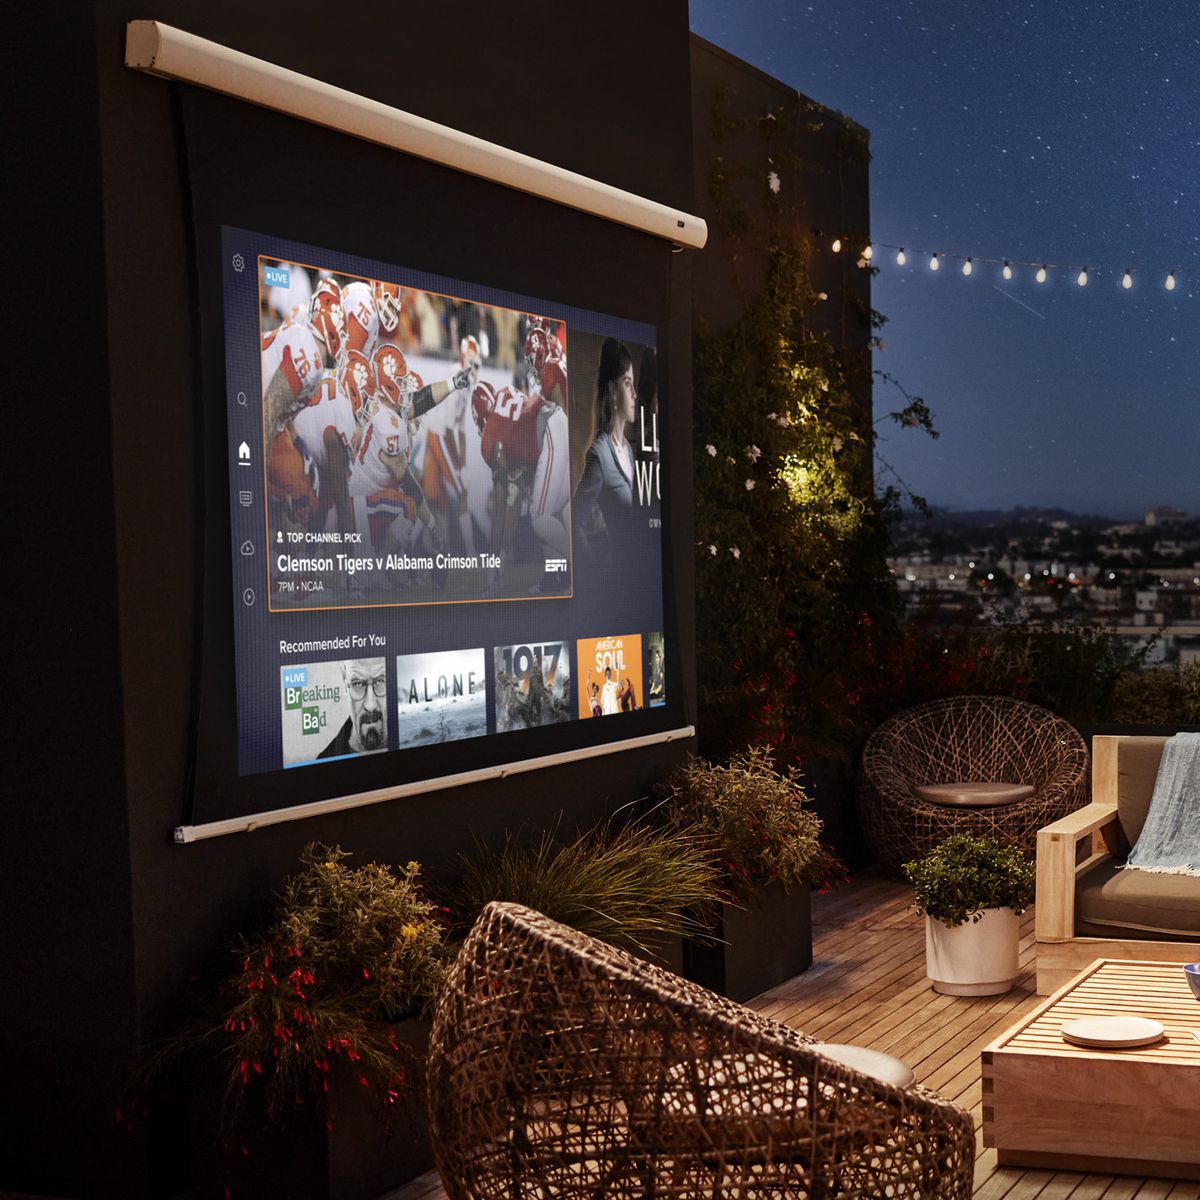 The image shows people watching Sling TV on an outdoor projector screen.